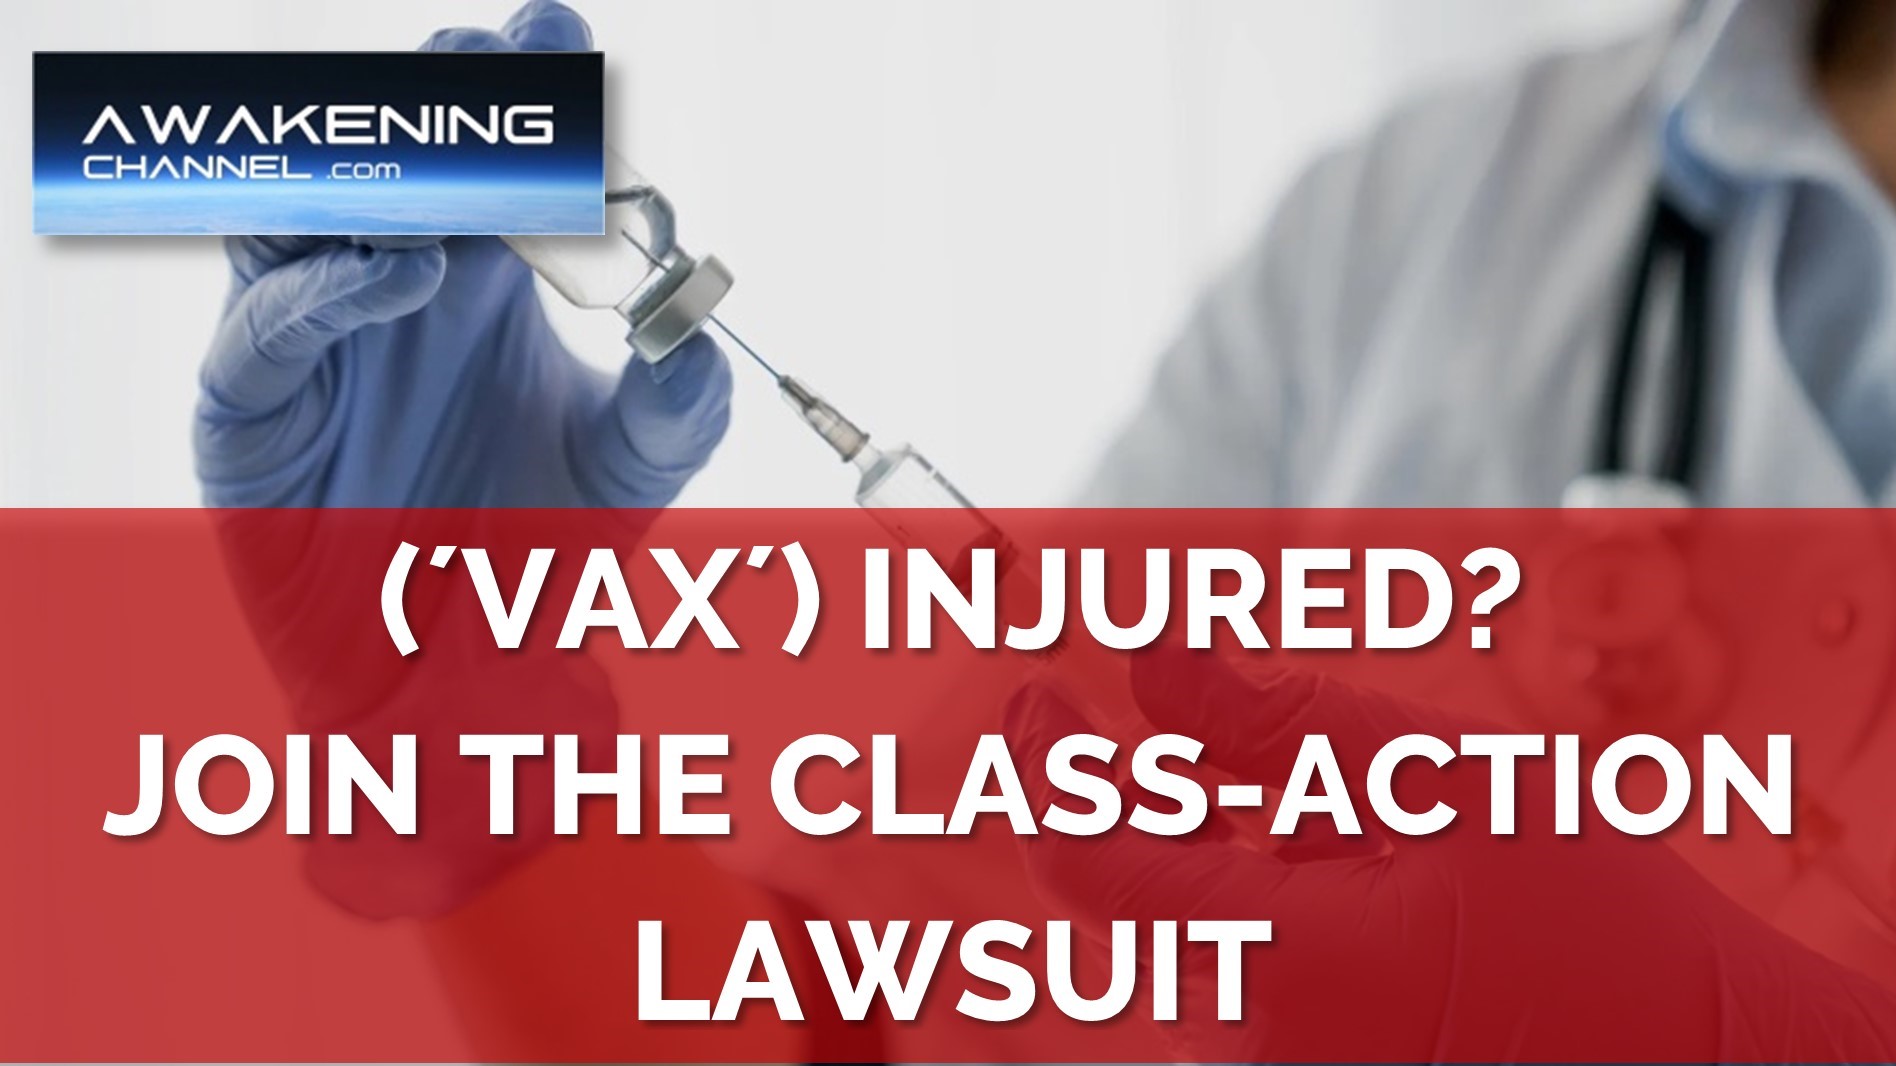 (´VAX´) INJURED? Join The Class-Action Lawsuit Against The Australian Govt.